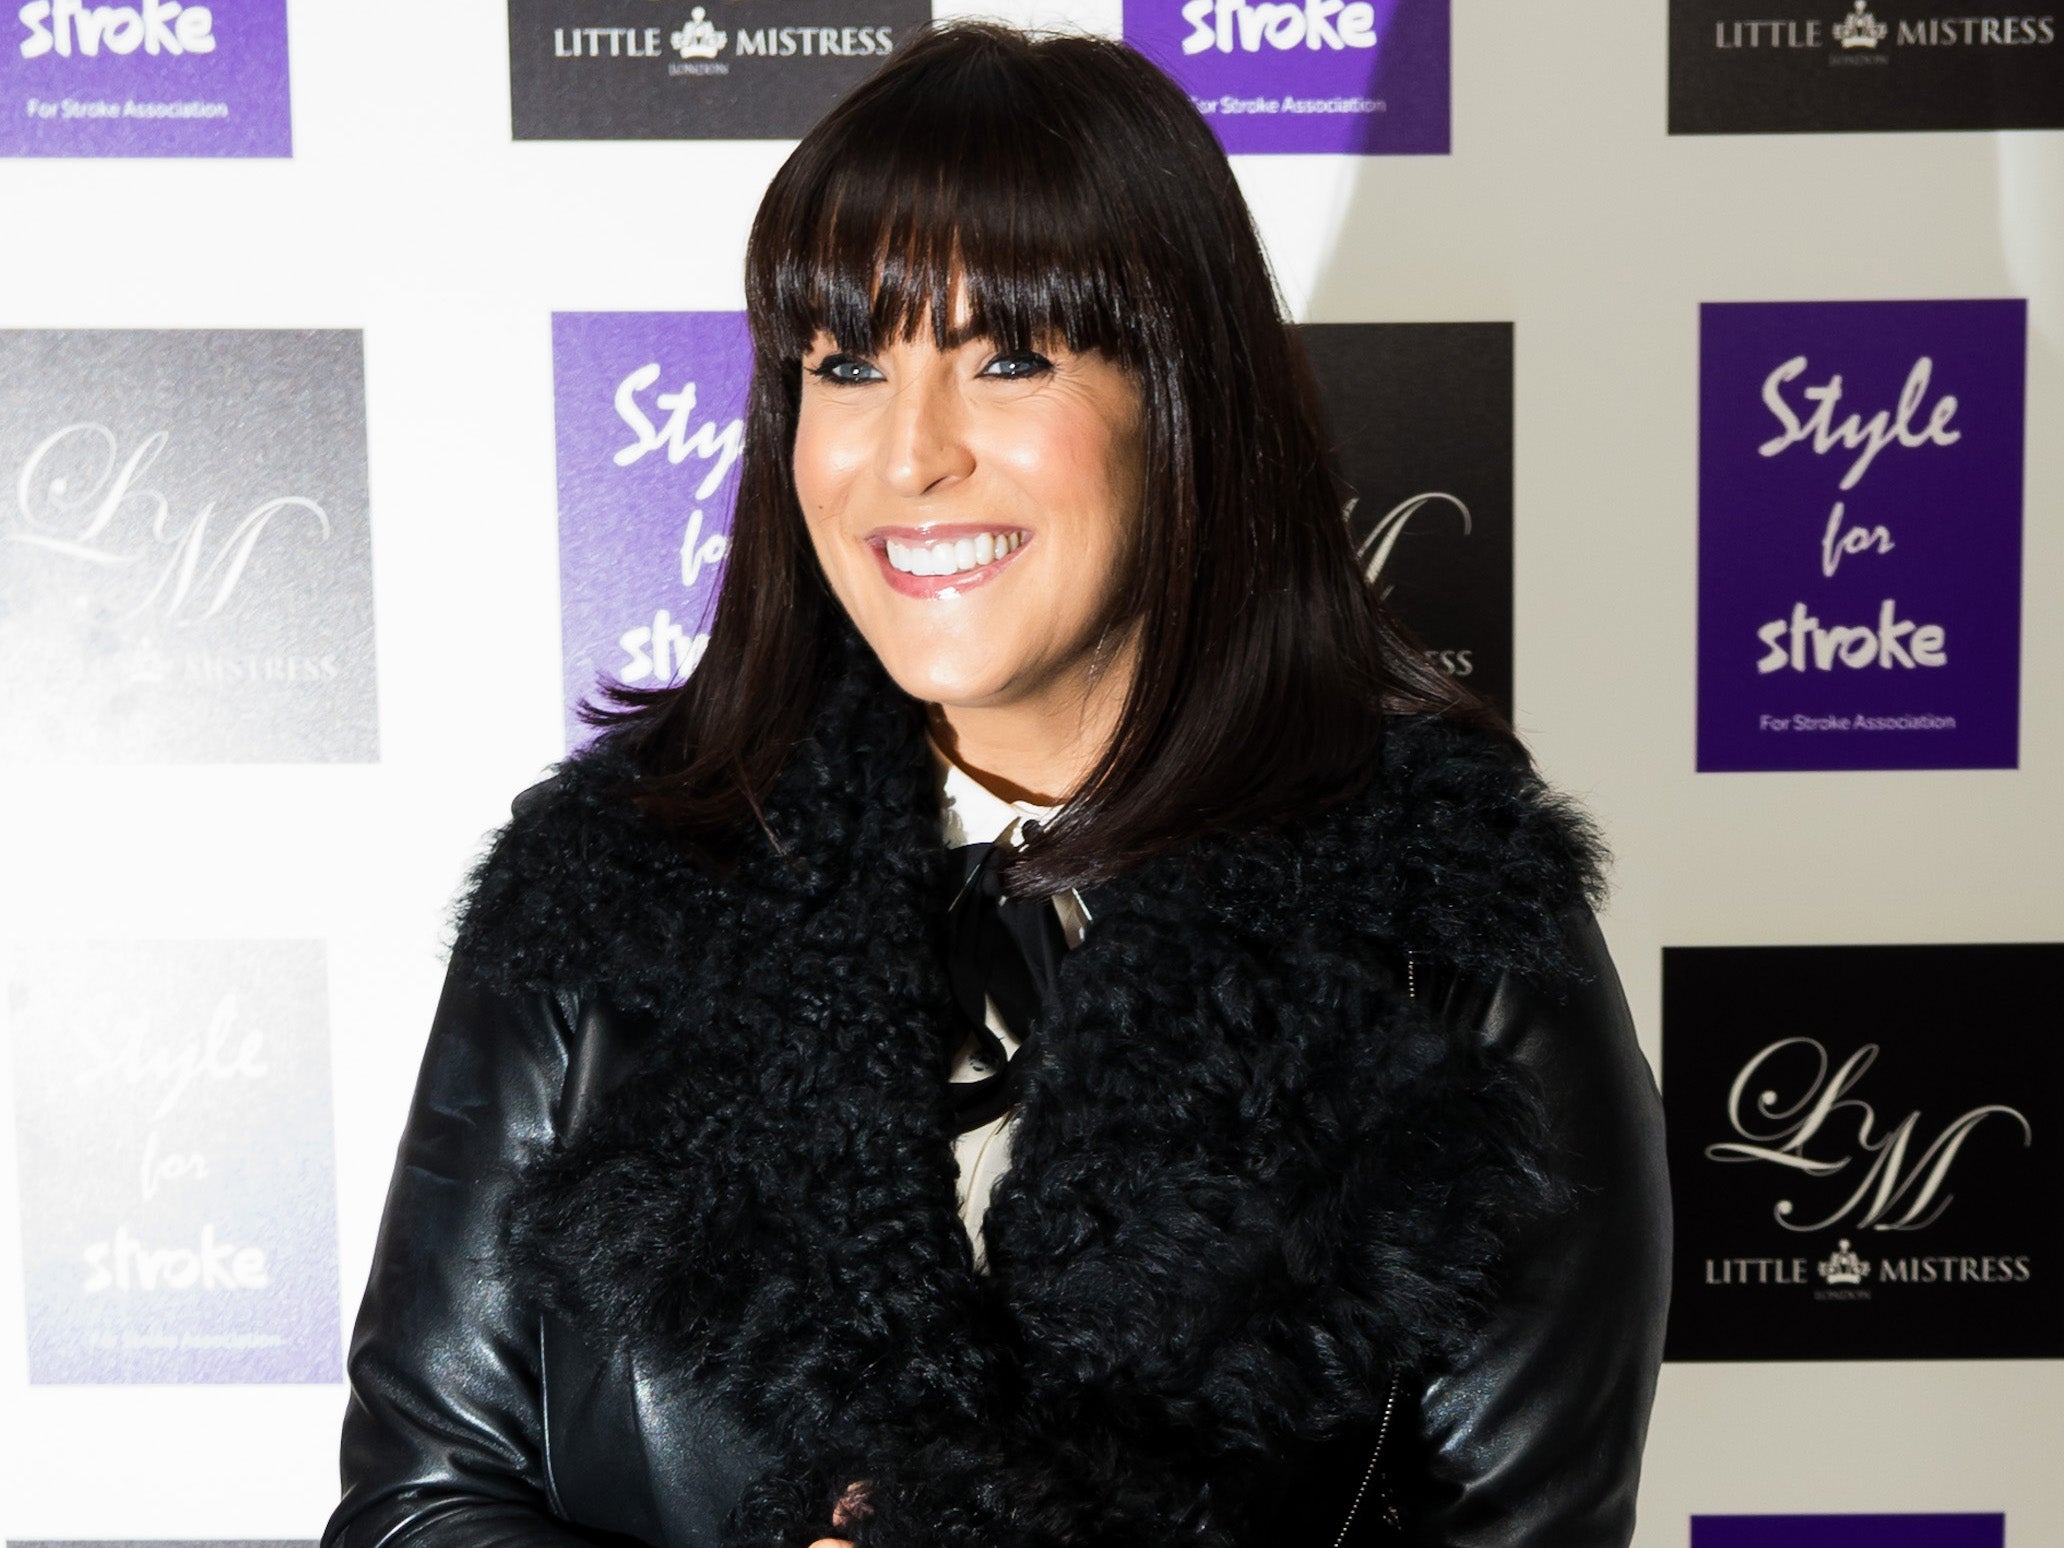 Anna Richardson attends the launch party of Style for Stroke by Nick Ede at No 5 Cavendish Square on October 2, 2012 in London, England.